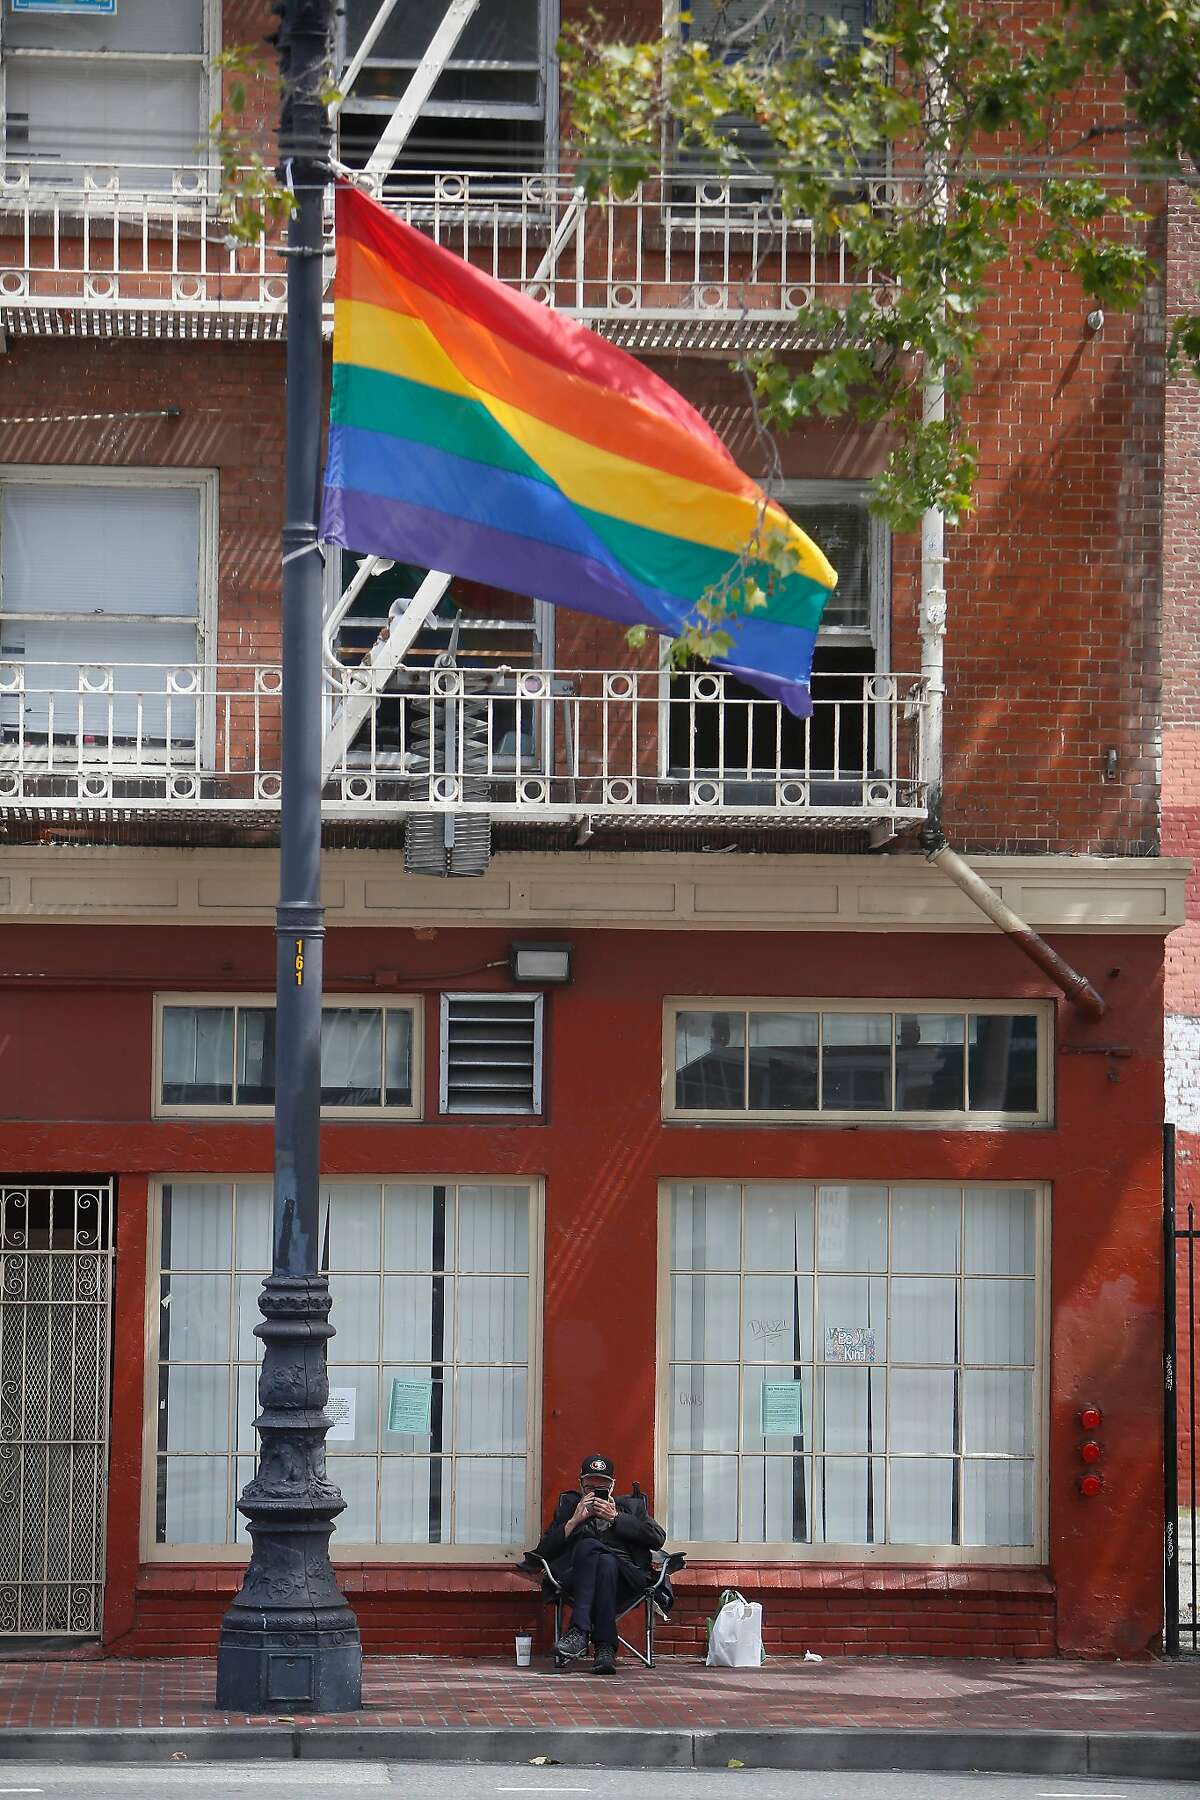 A man sits on Market Street below a rainbow flag and next to the Civic Center Navigation Center on Monday, June 24, 2019 in San Francisco, Calif.